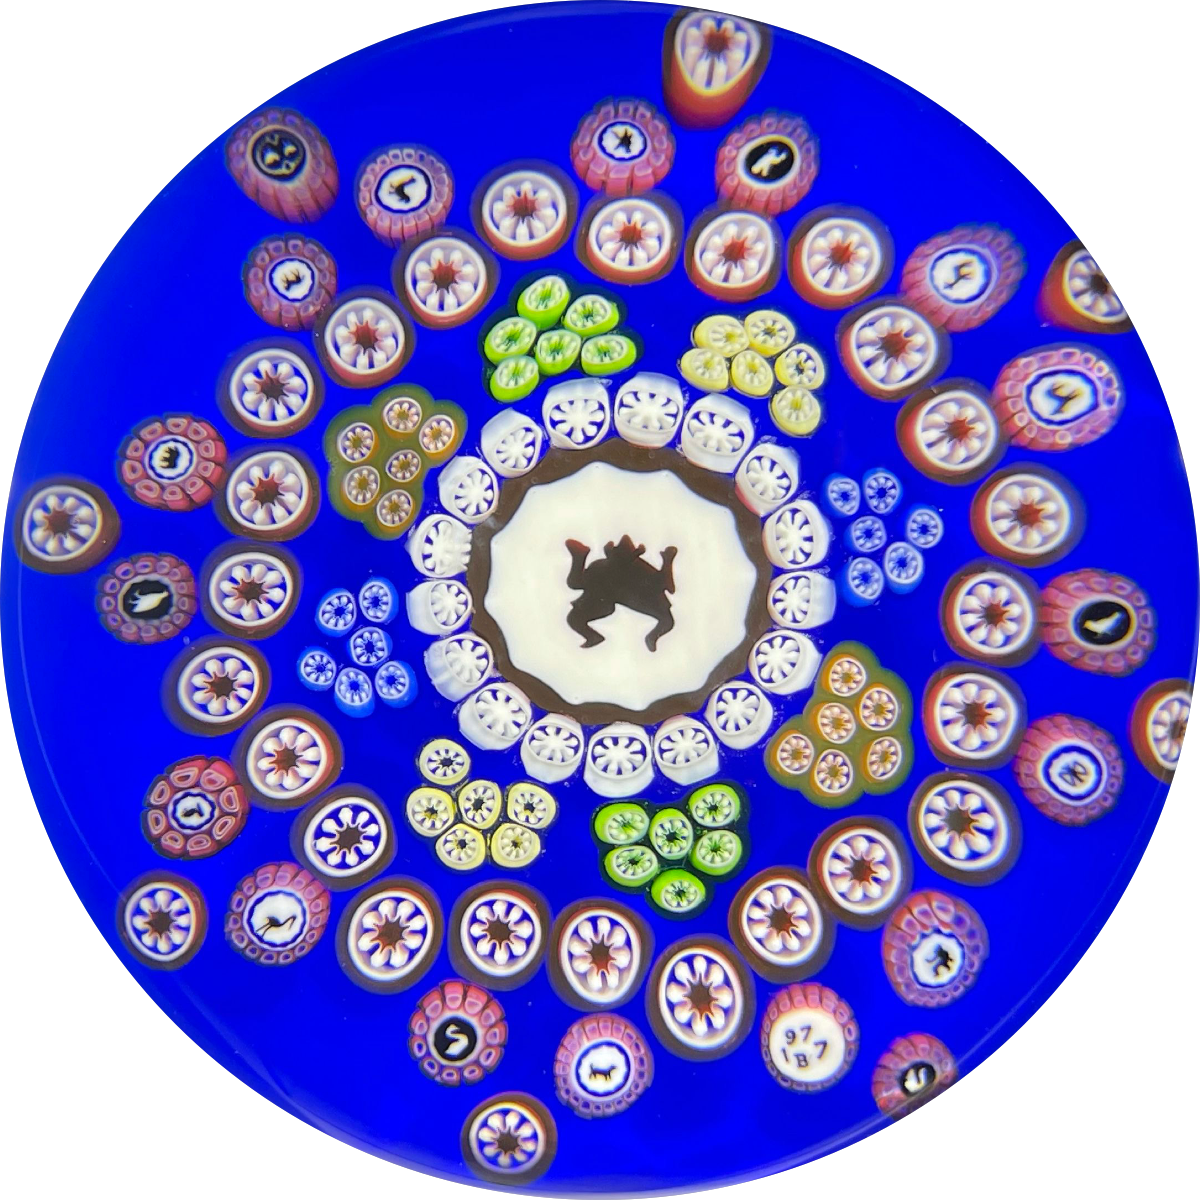 Baccarat Crystal 1977 LE Diable Rouge Gridel Murrine with Patterned Complex Millefiori on Opaque Blue Ground